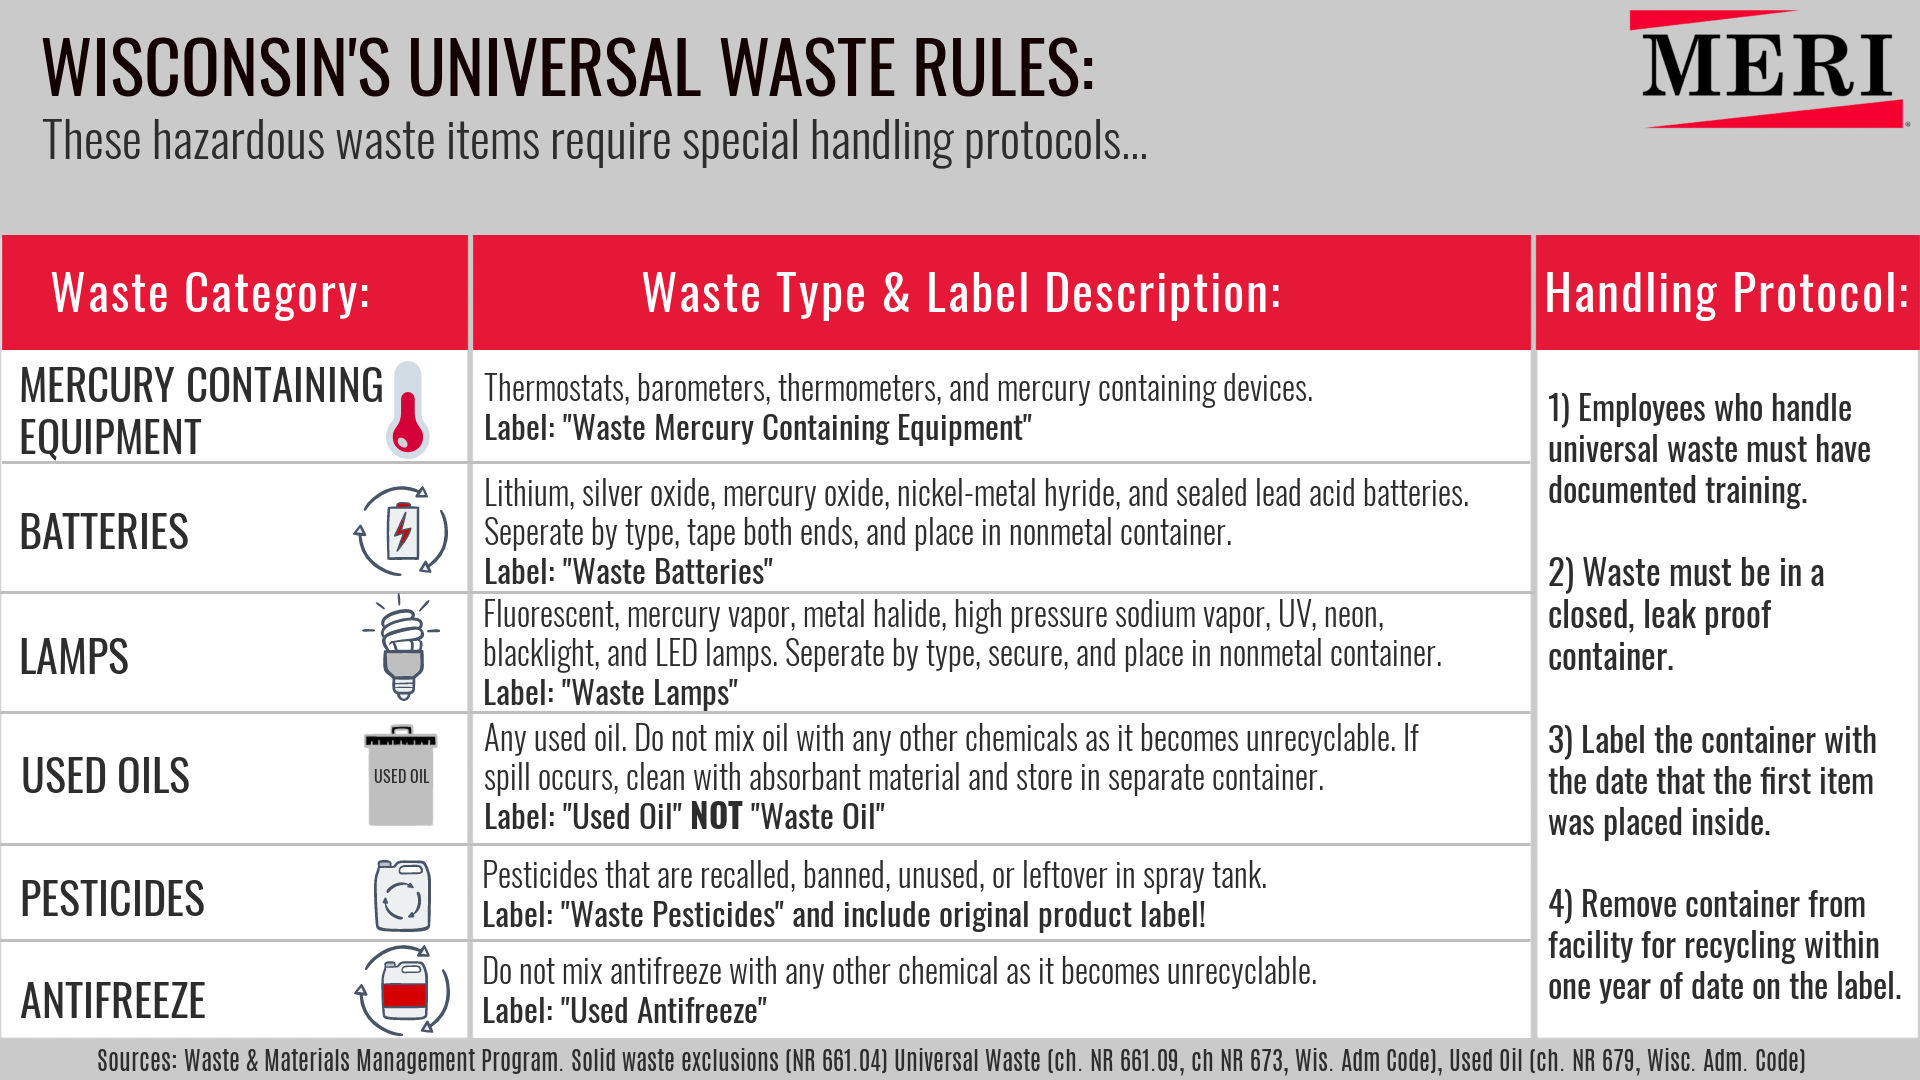 WI universal waste rules poster